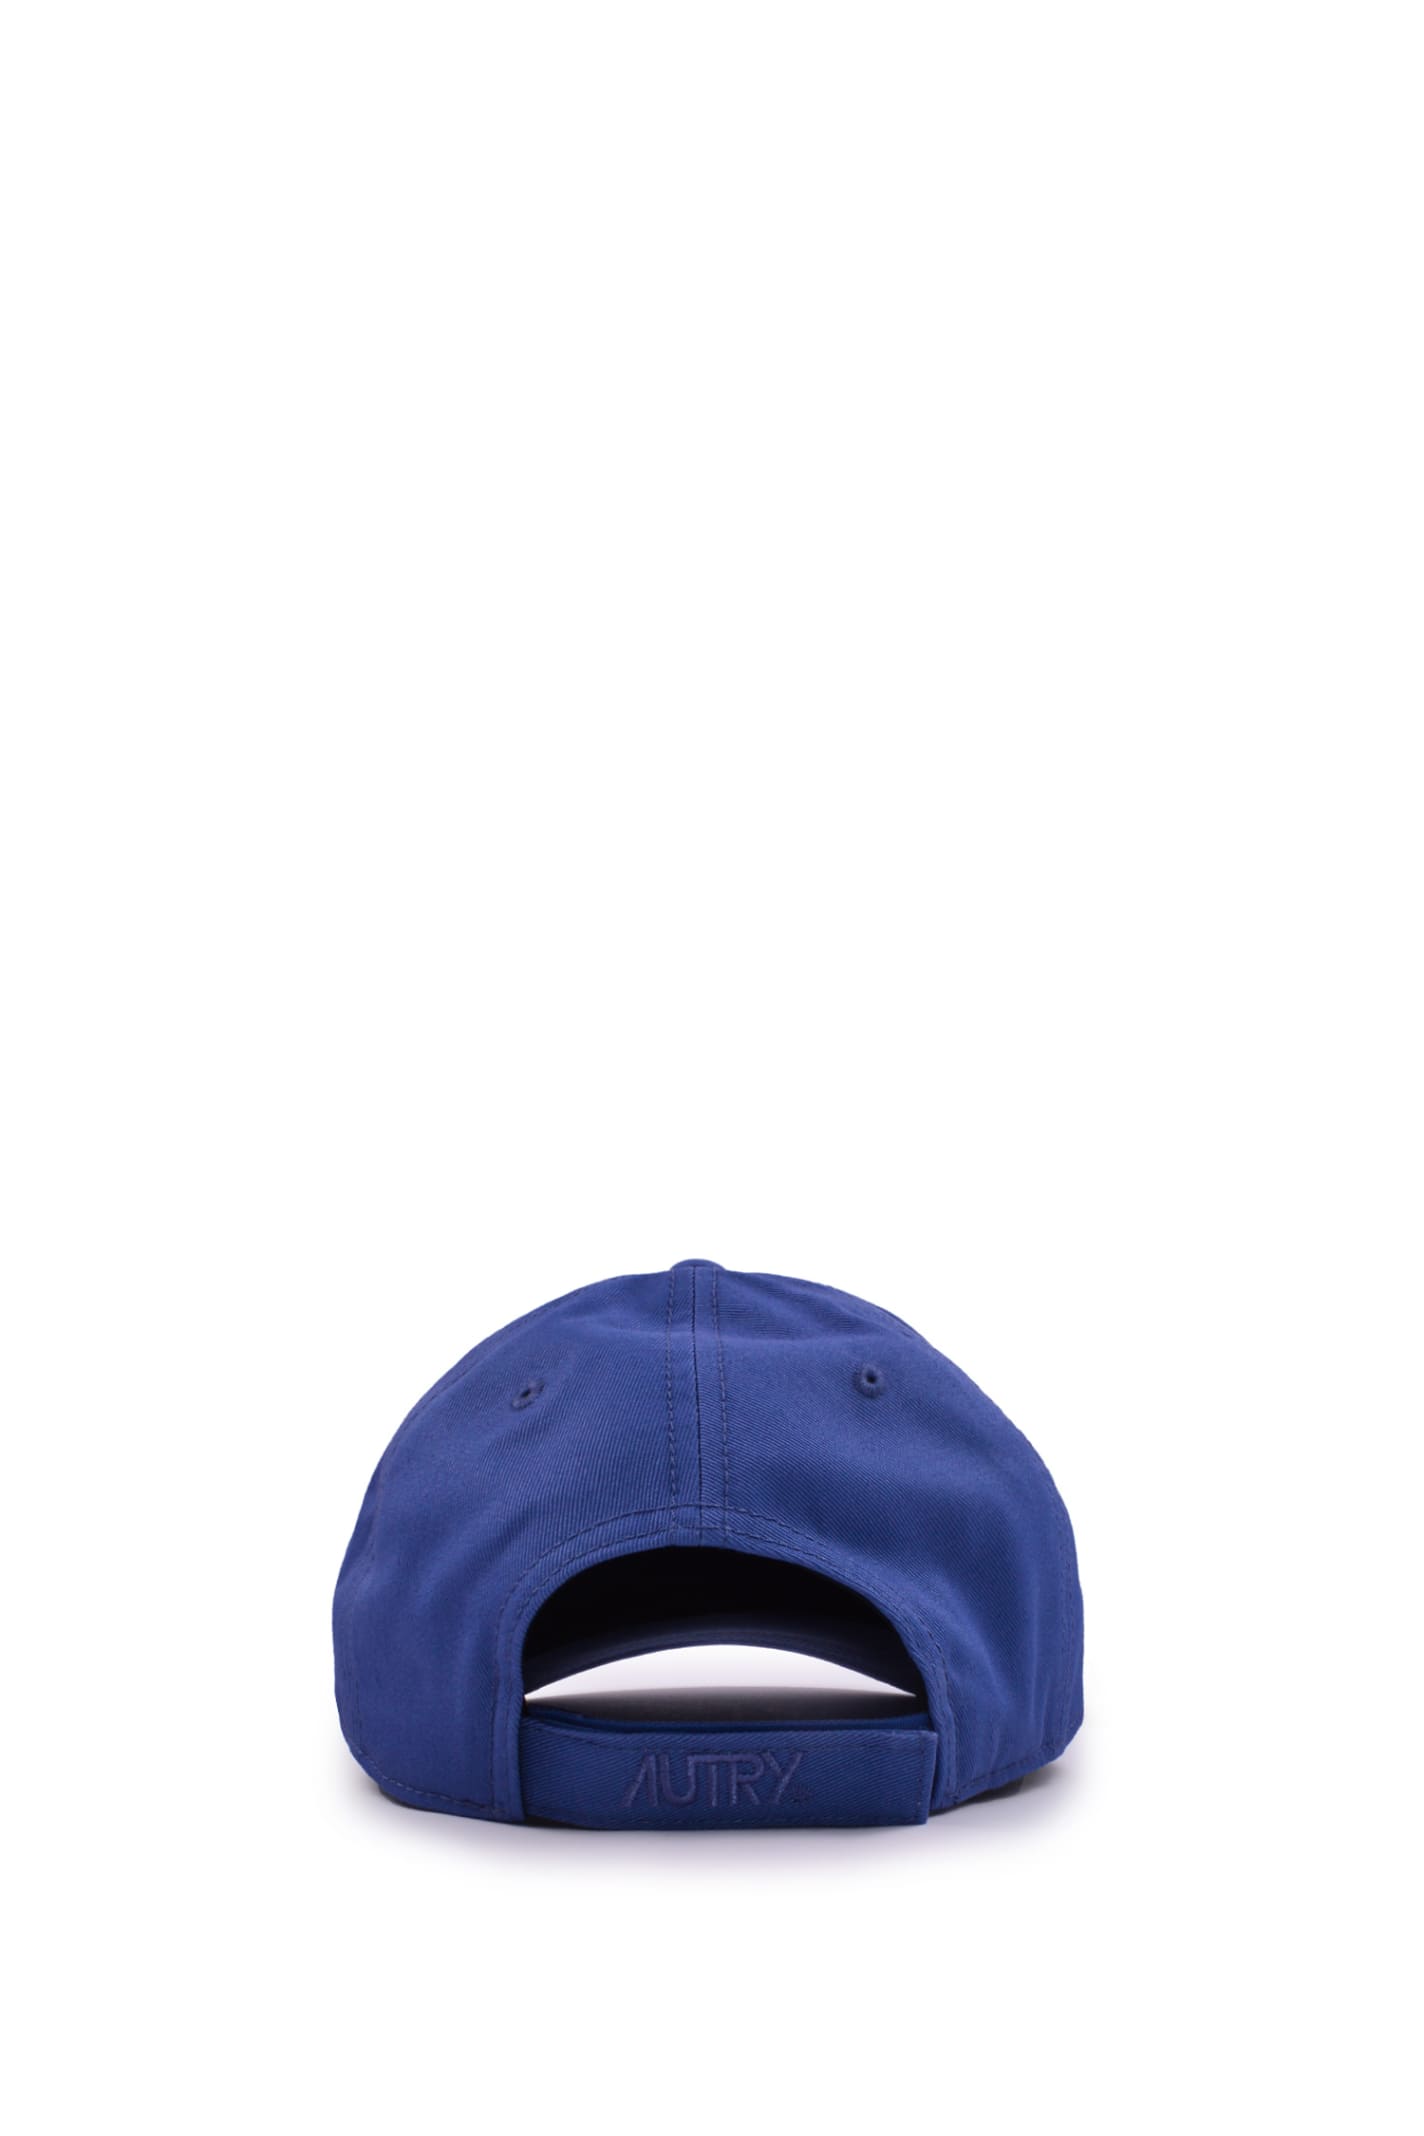 Shop Autry Hats In Clear Blue